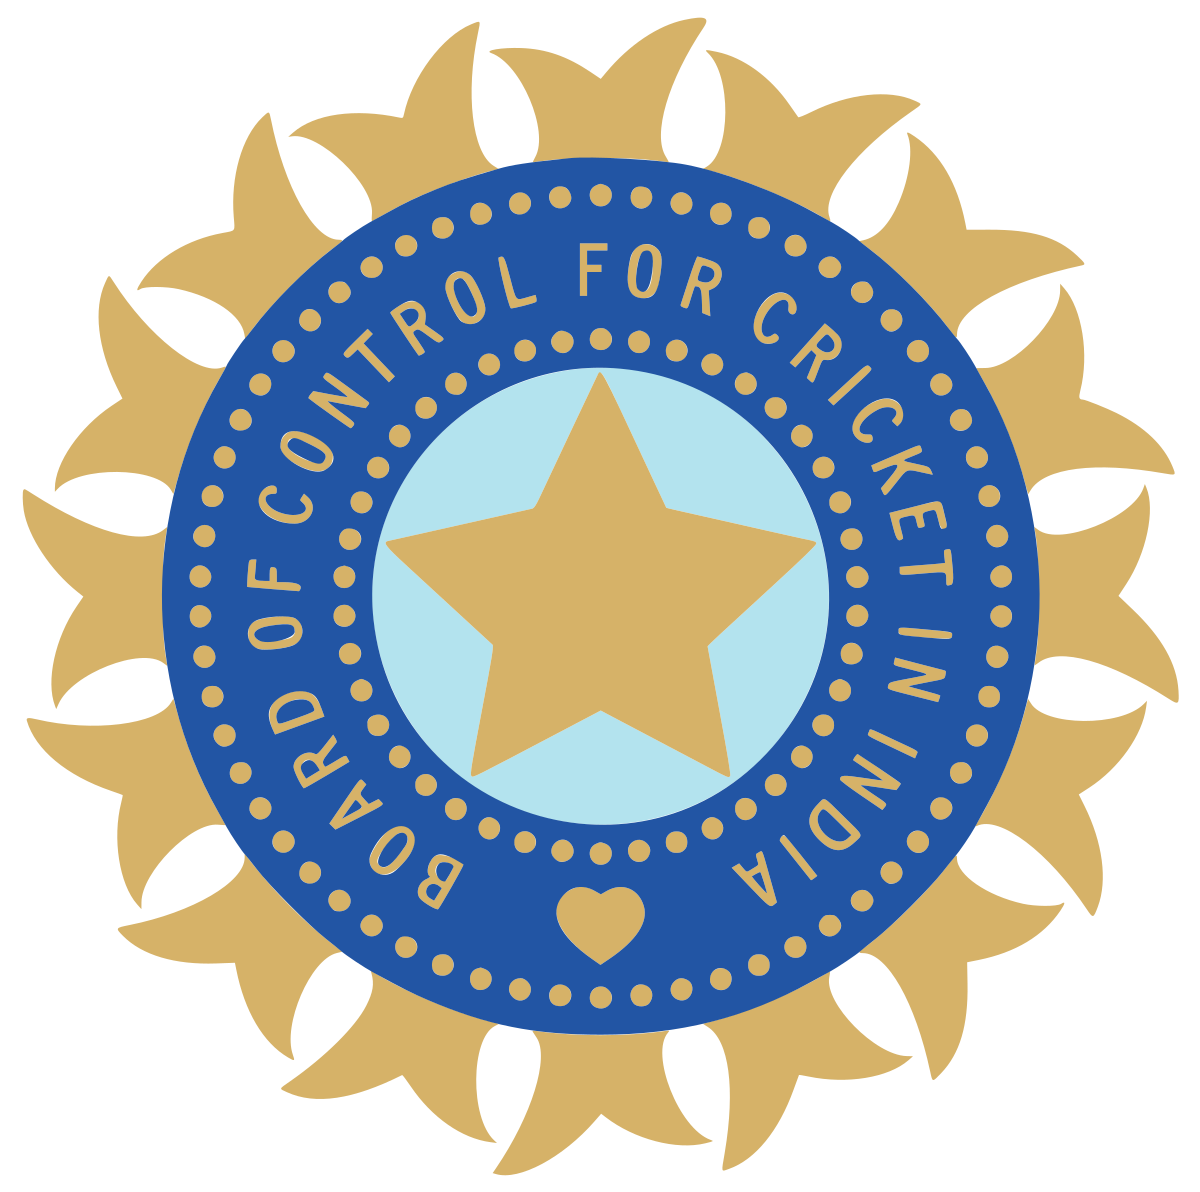 Board of Control for Cricket in India - Wikipedia